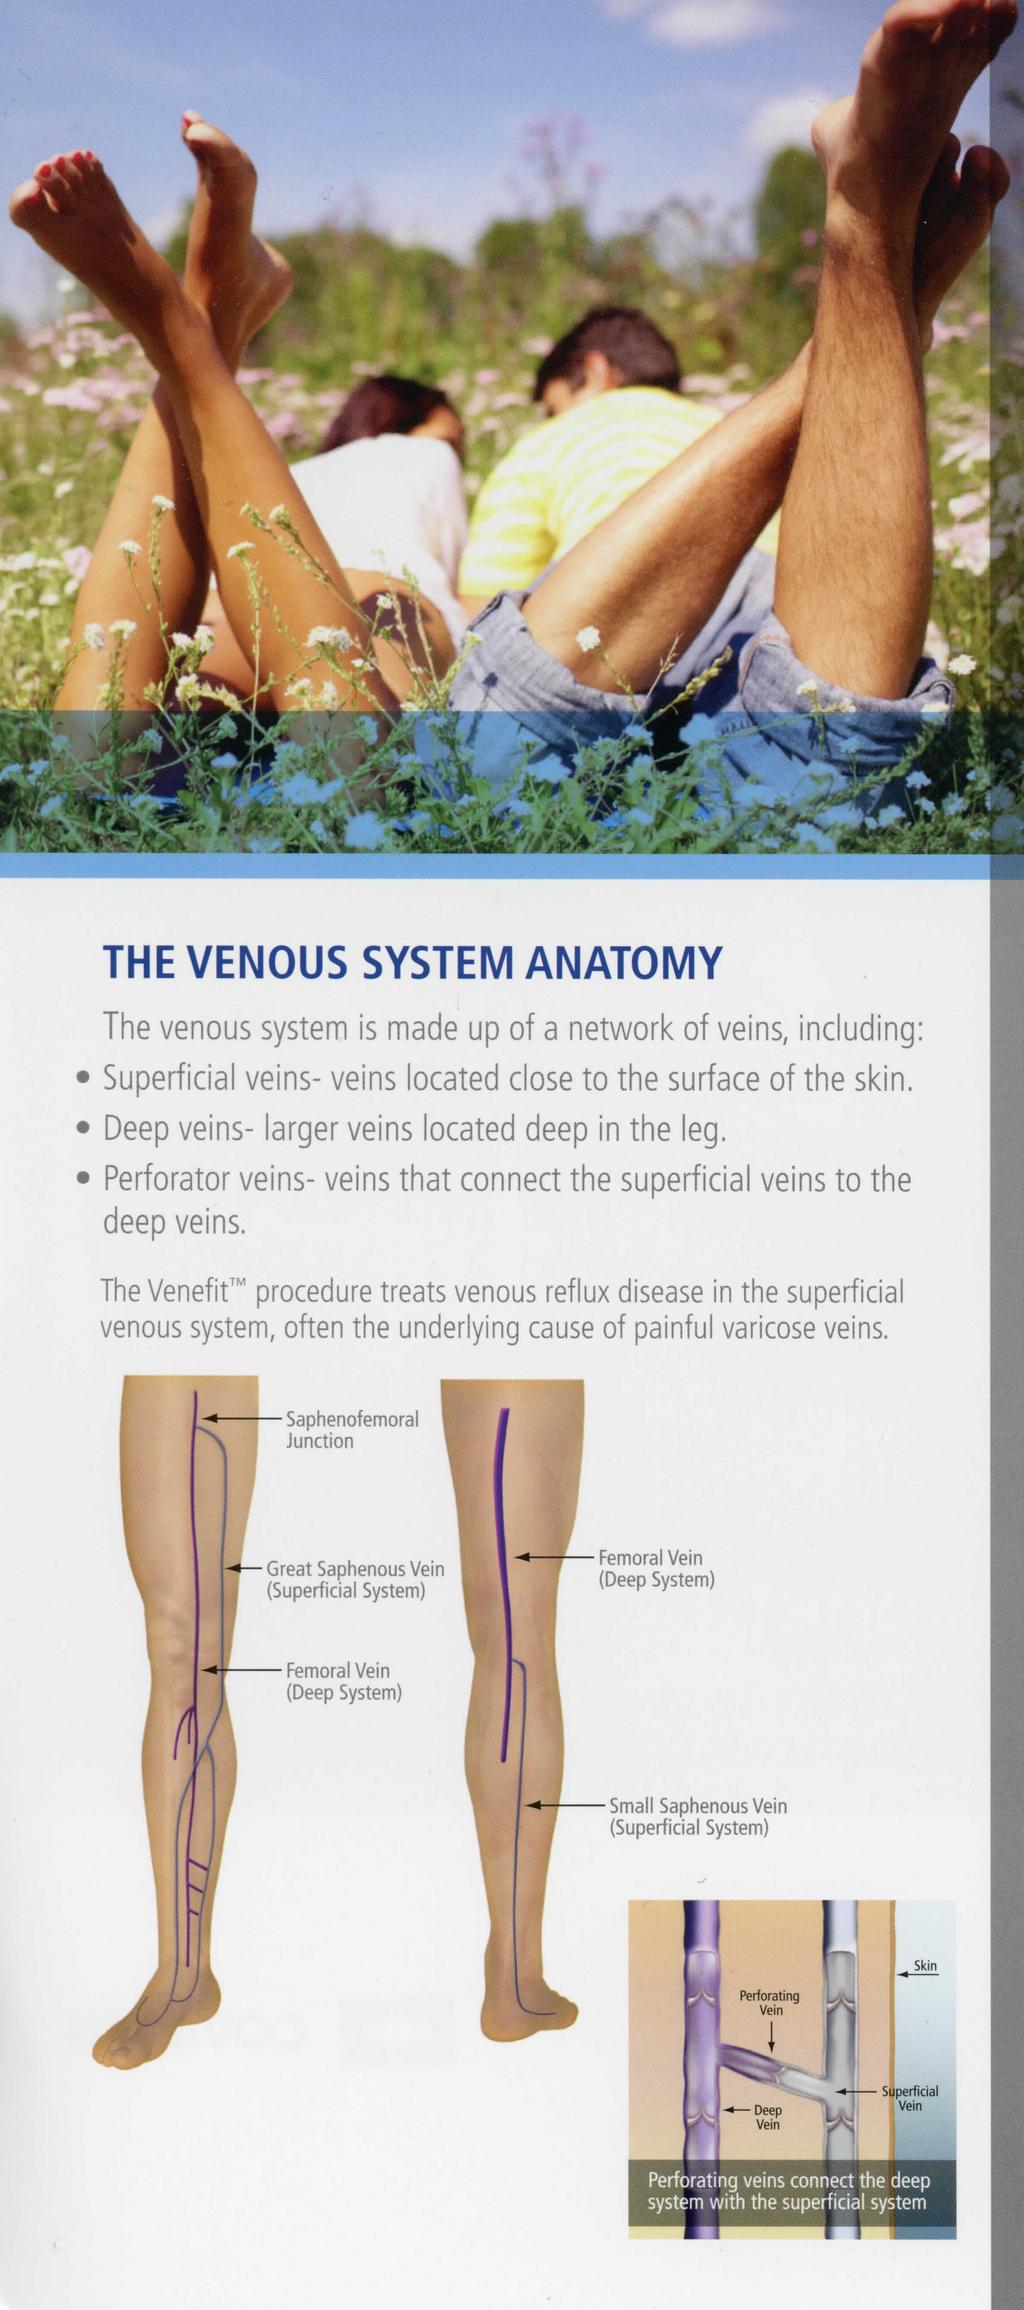 THE VENOUS SYSTEM ANATOMY The venous system is made up of a network of veins, including: 1 Superficial veins- veins located close to the surface of the skin.